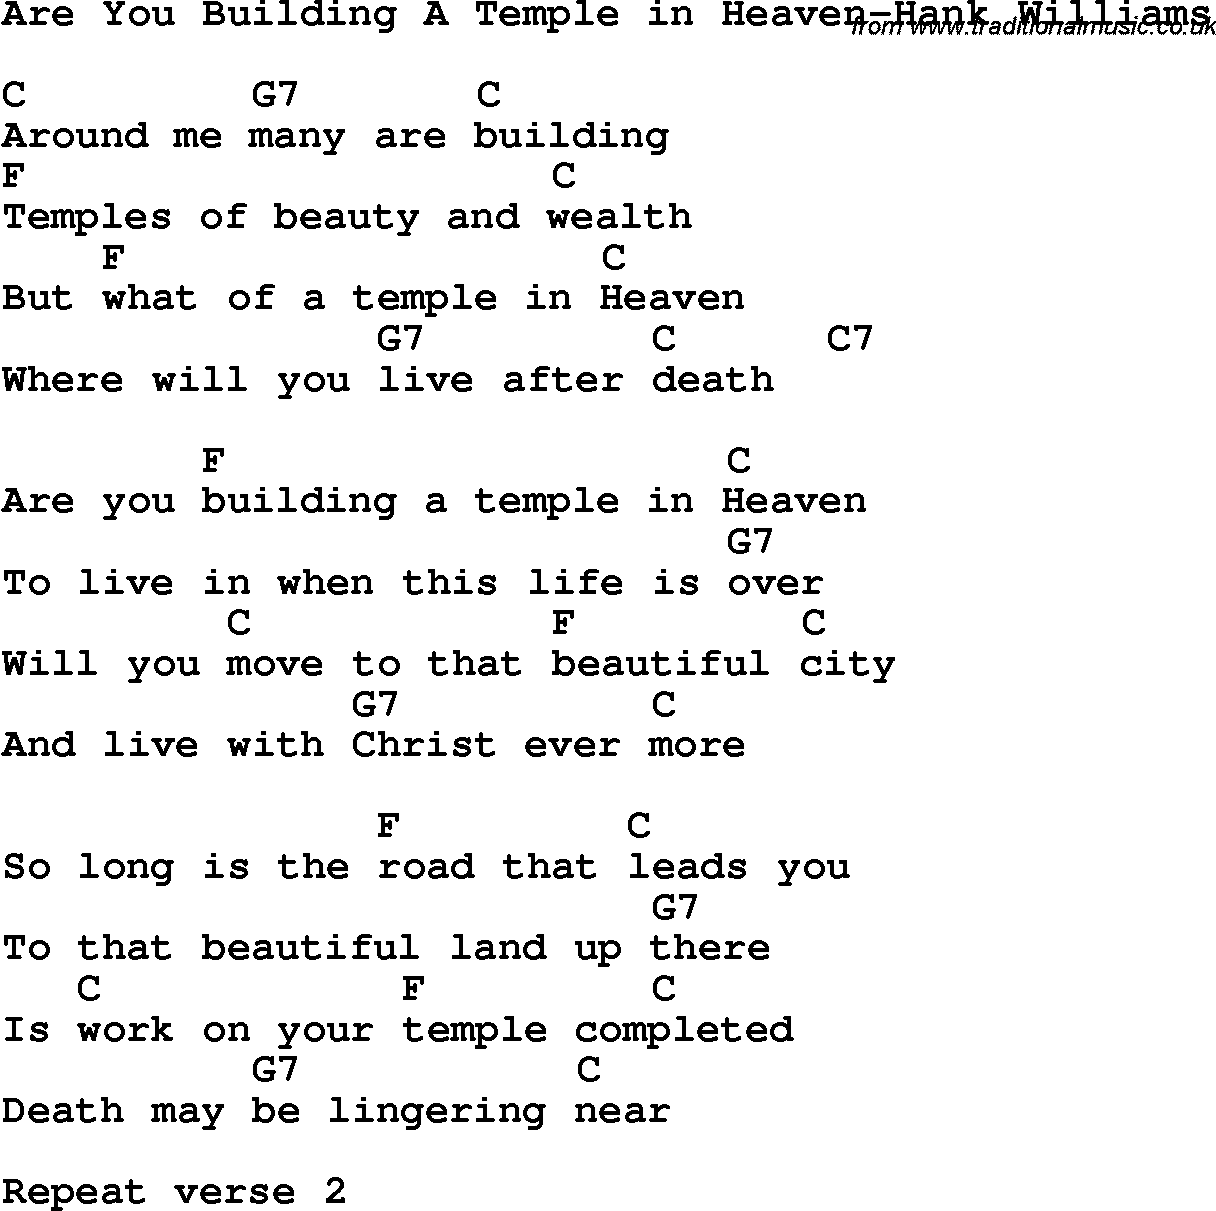 Country, Southern and Bluegrass Gospel Song Are You Building A Temple in Heaven-Hank Williams lyrics and chords